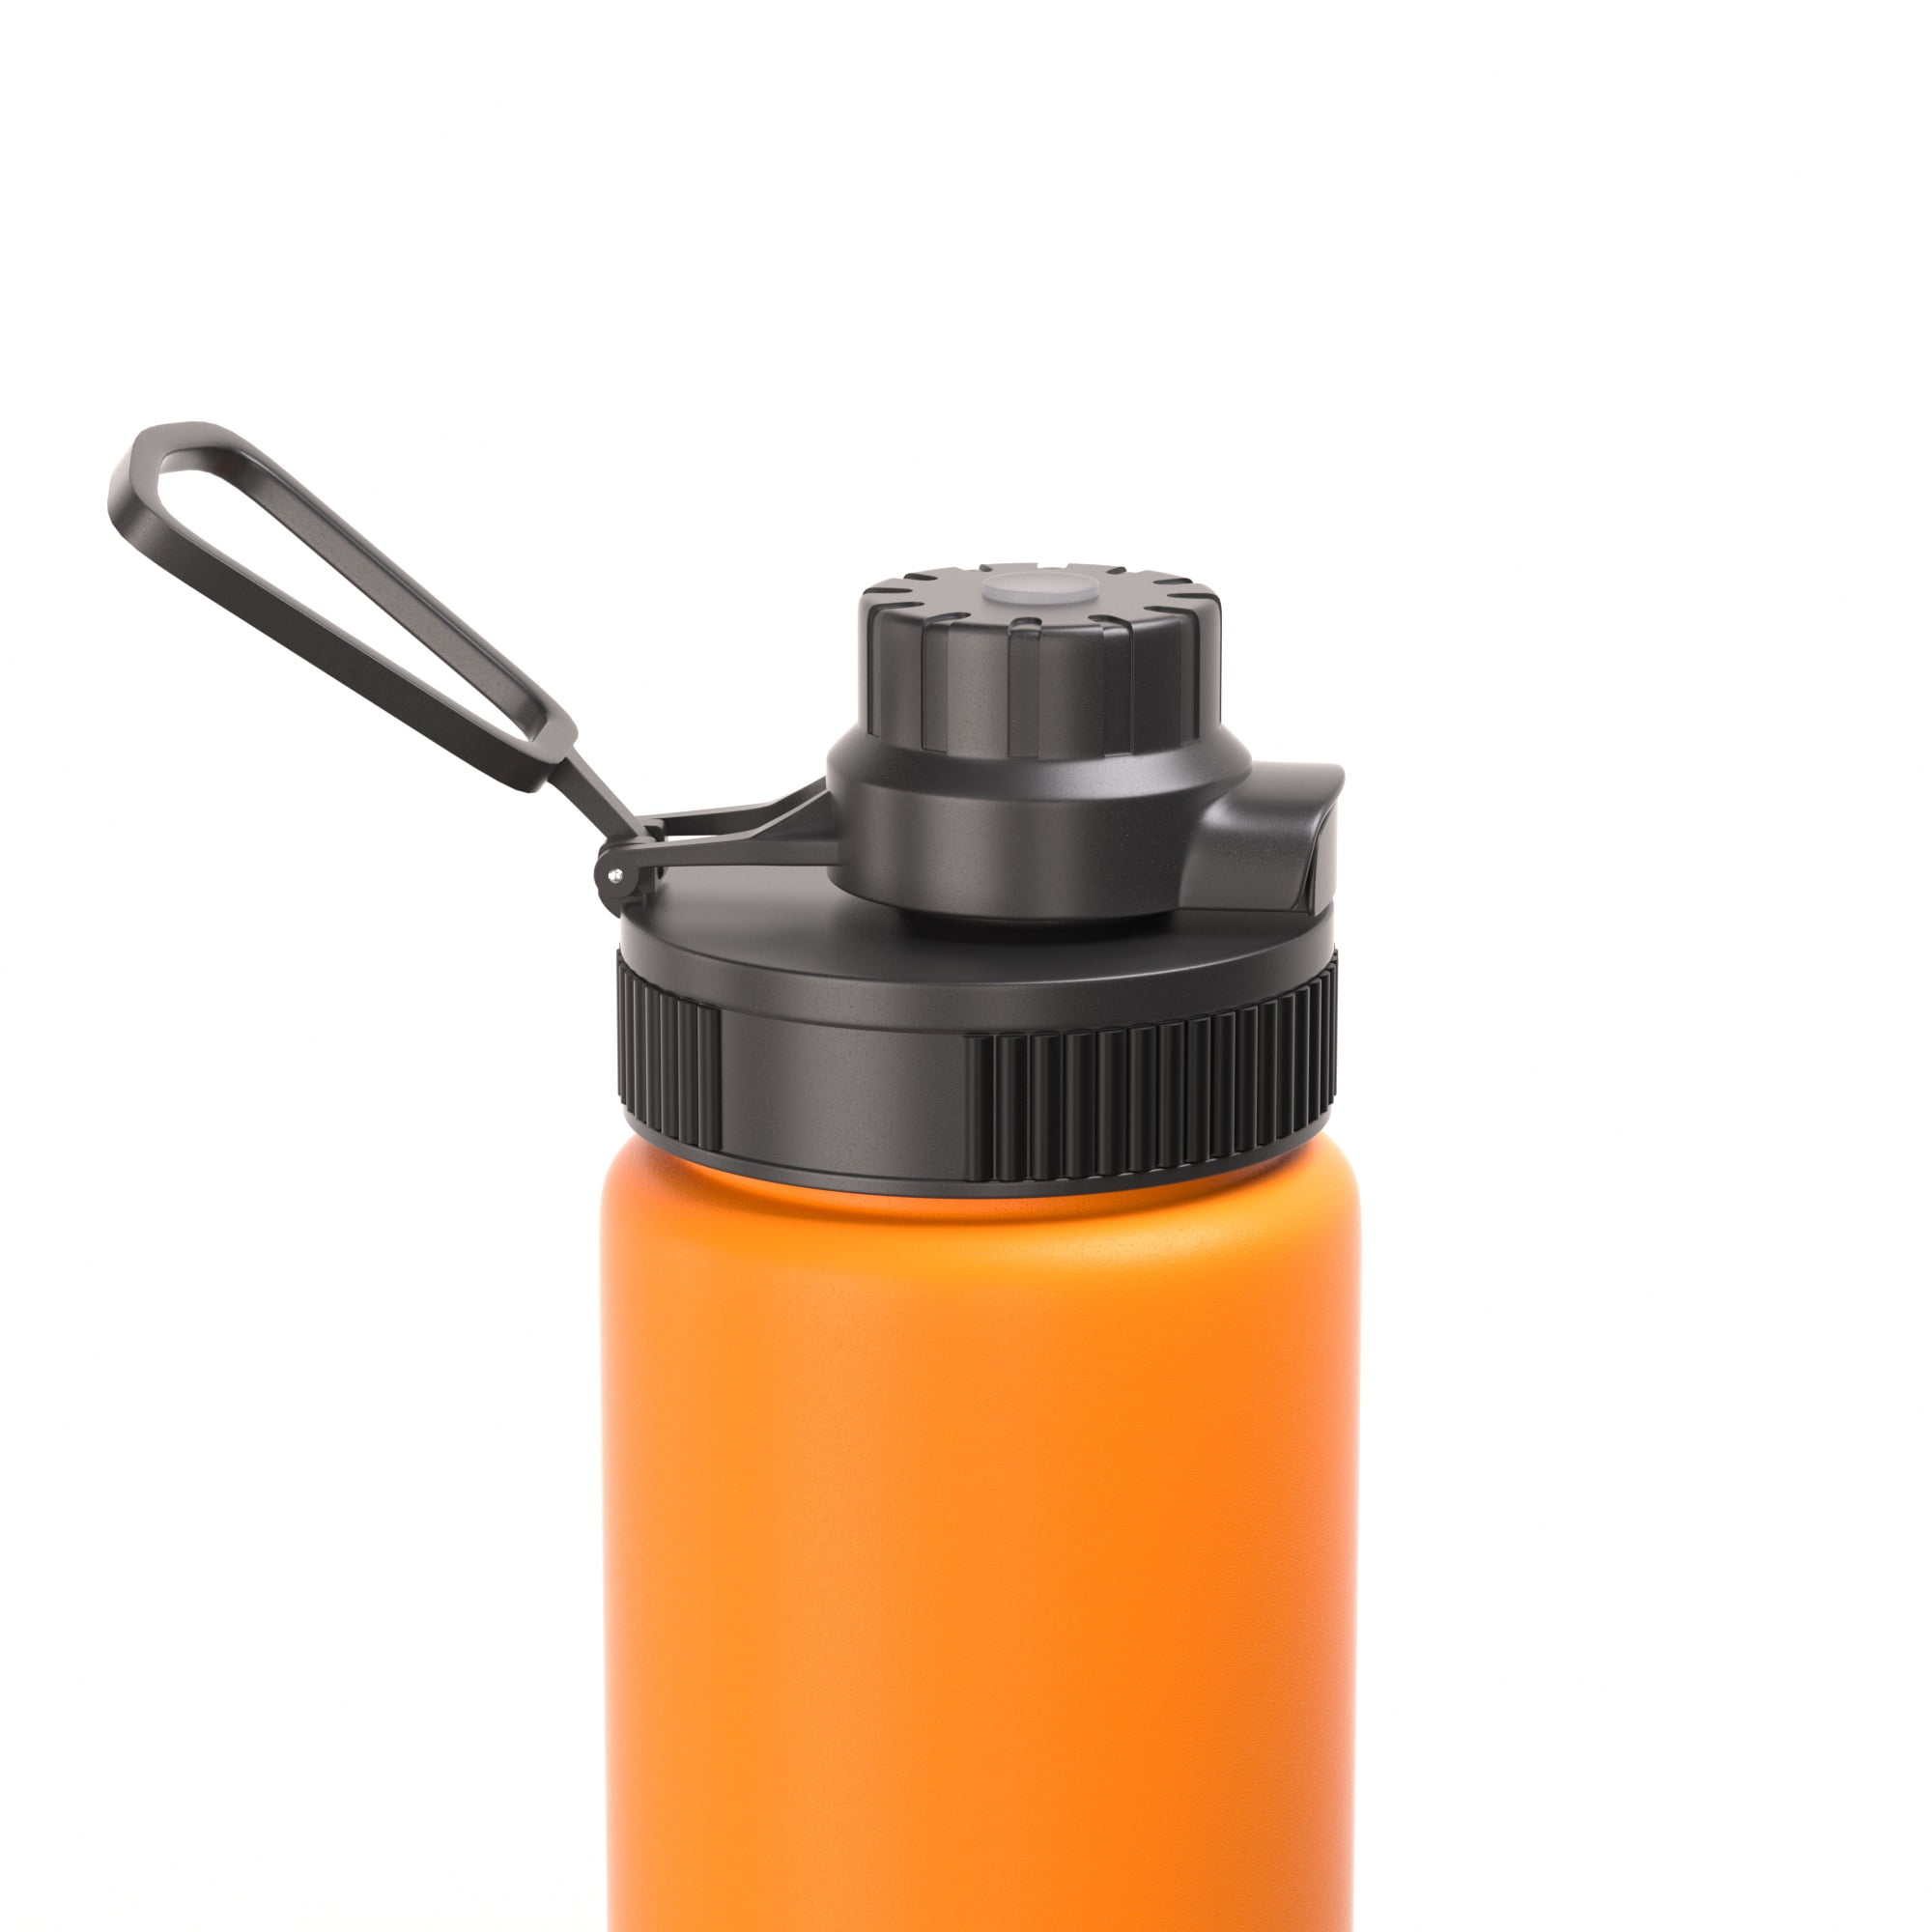 Ouharty Replacement Wide Mouth Straw Lids for Hydro Flask Lids